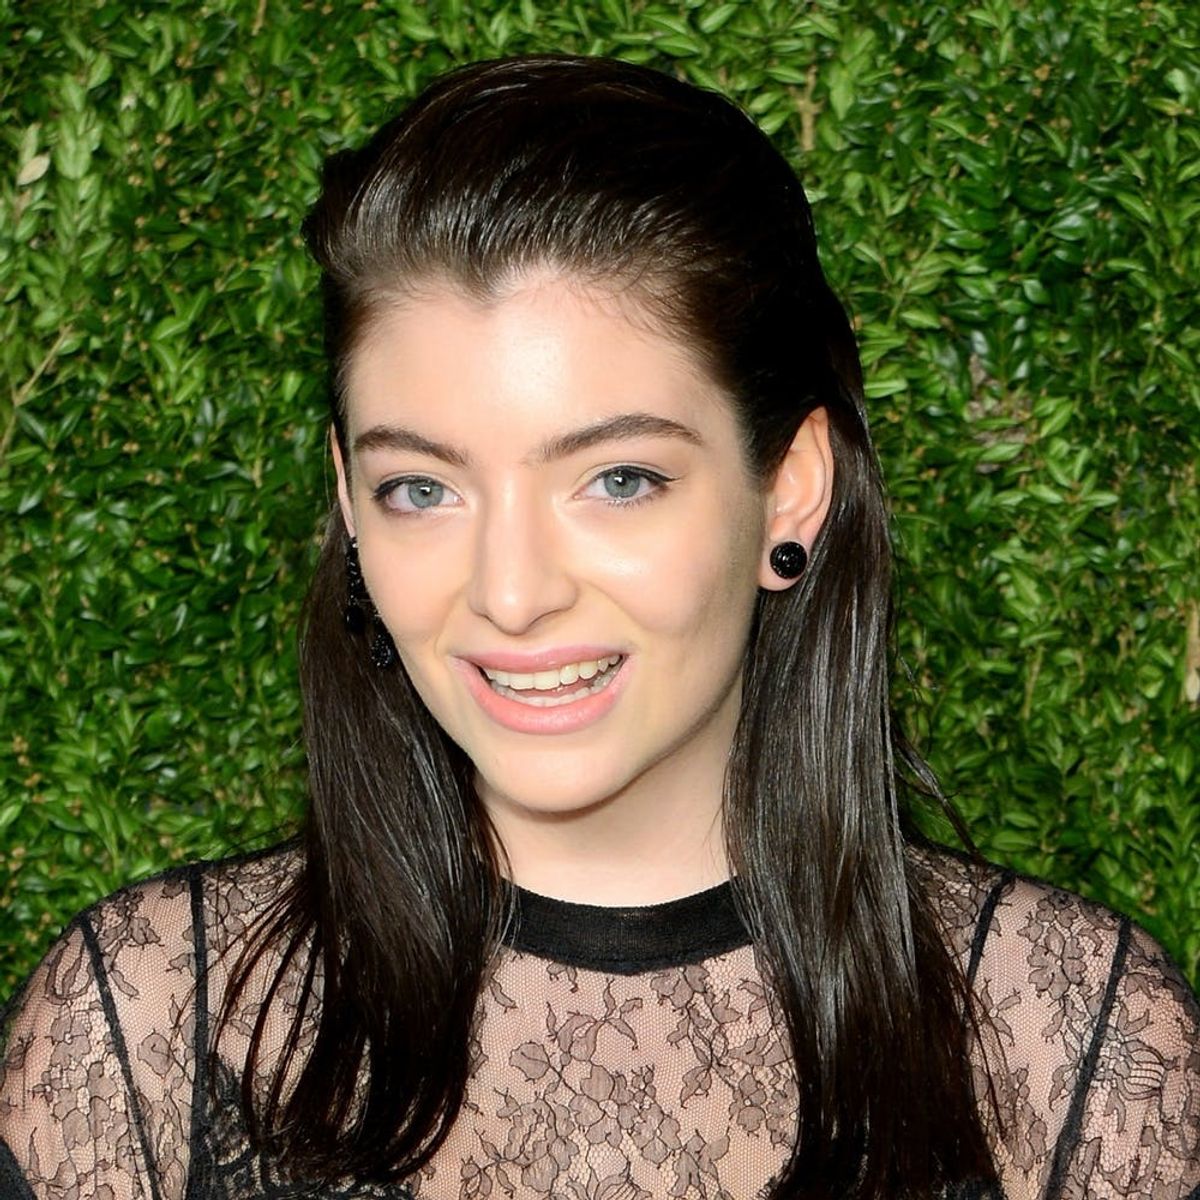 This Is the Touching Reason Lorde Just Gave a Family of Strangers $10K